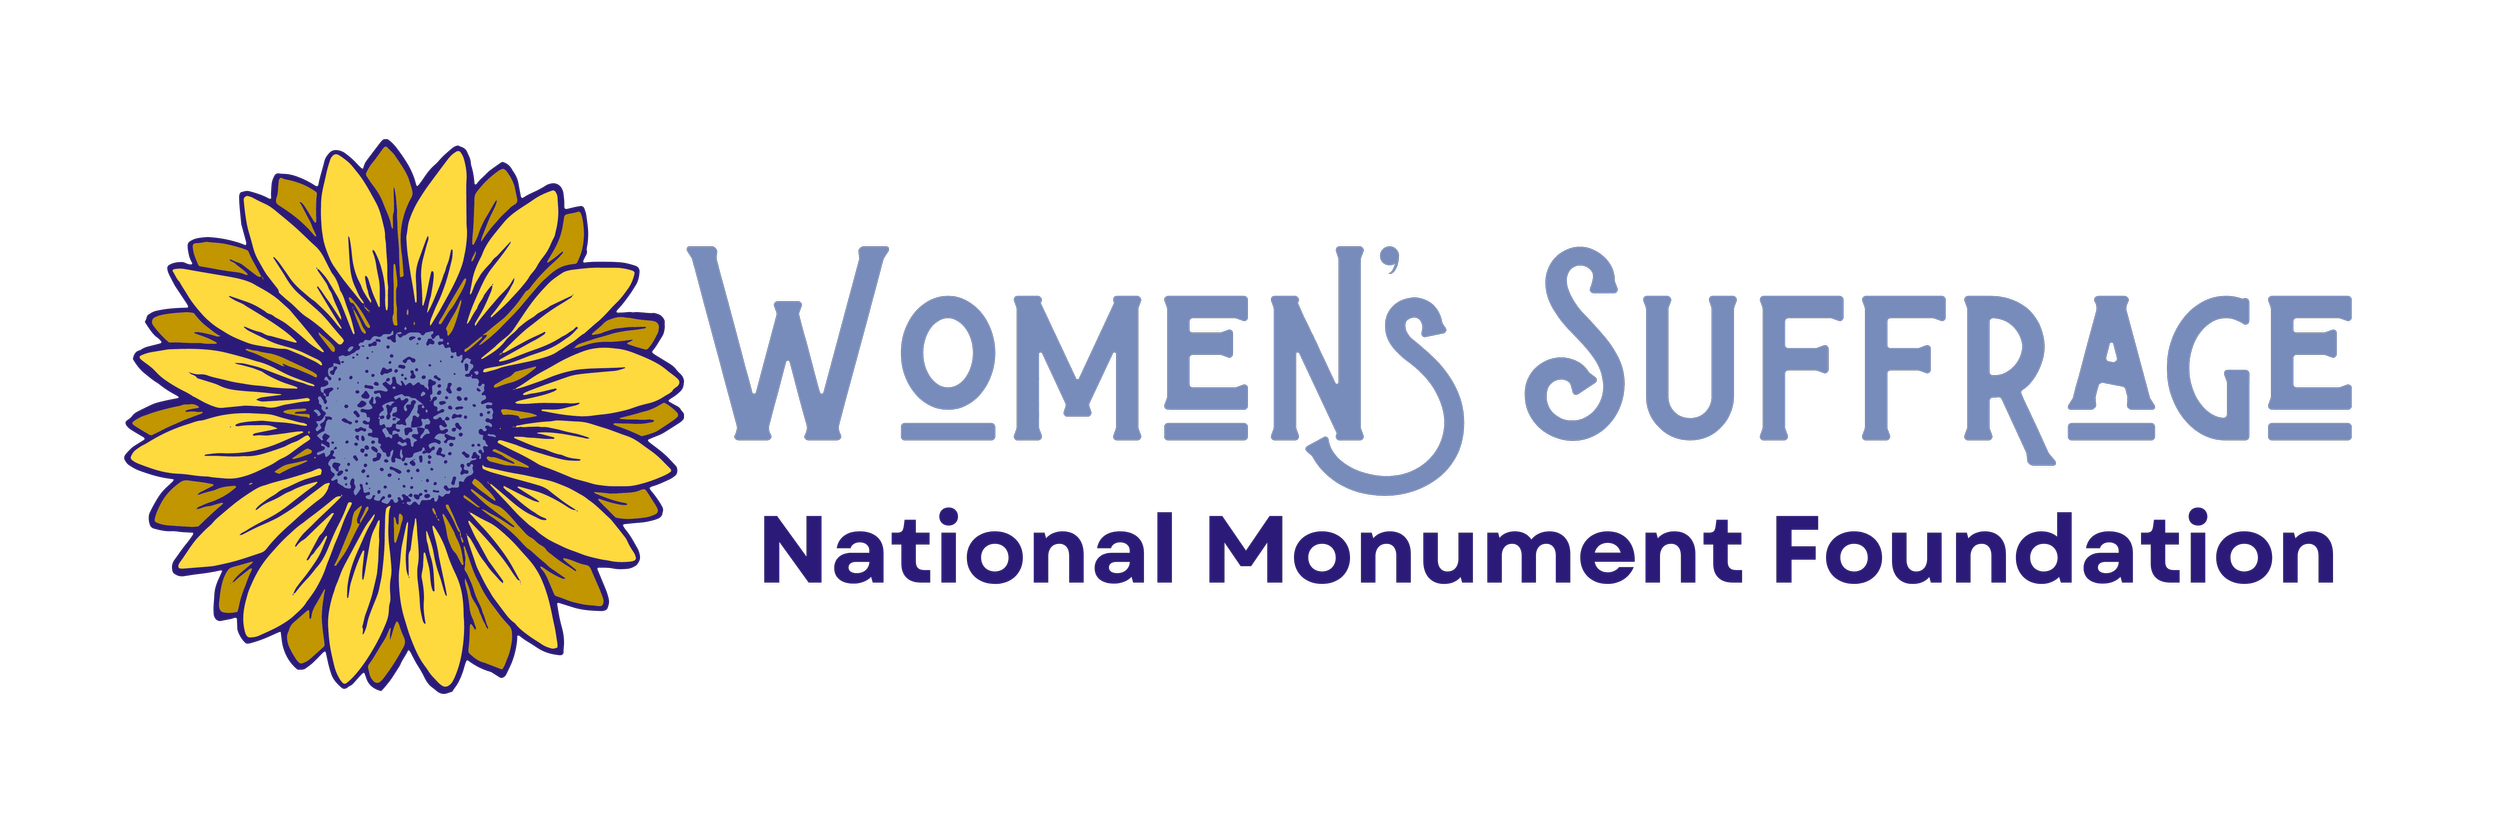 Forever Stamp Honors Centennial of Women's Suffrage - Newsroom